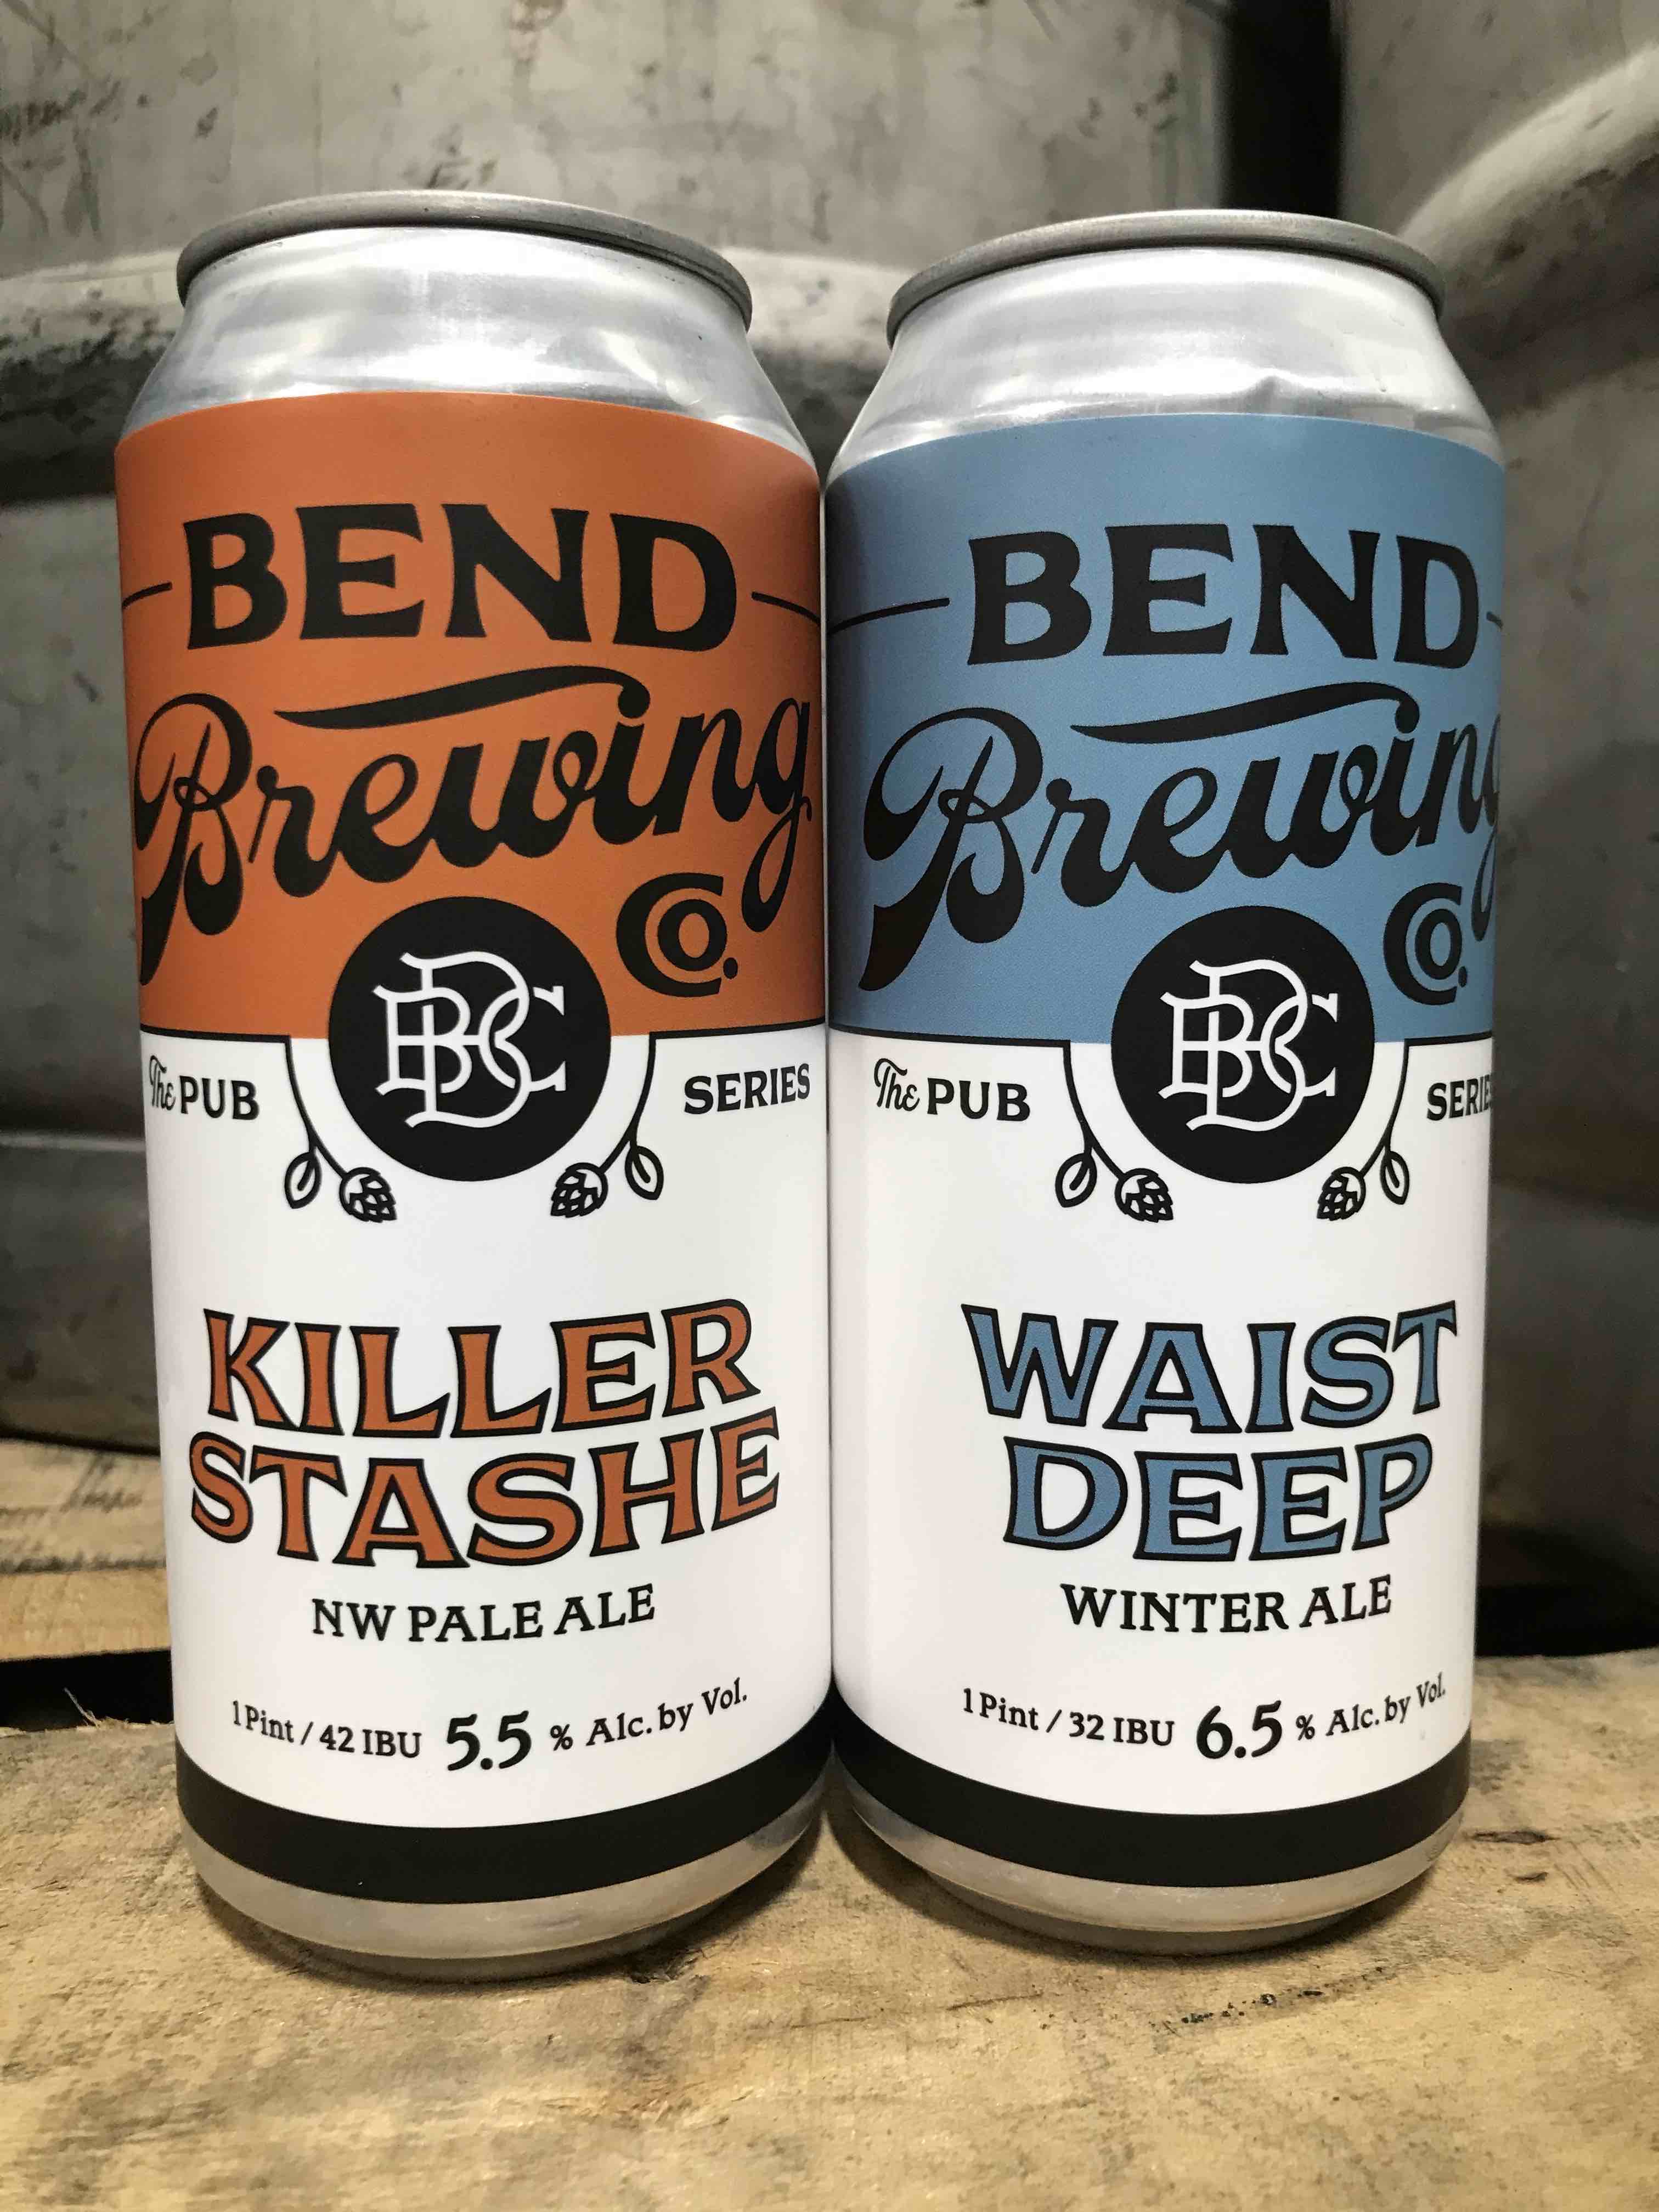 image of Killer Stashe NW Pale Ale and Waist Deep Winter Ale, part of the Bend Brewing Co.'s new Pub Series, courtesy of Bend Brewing Co.